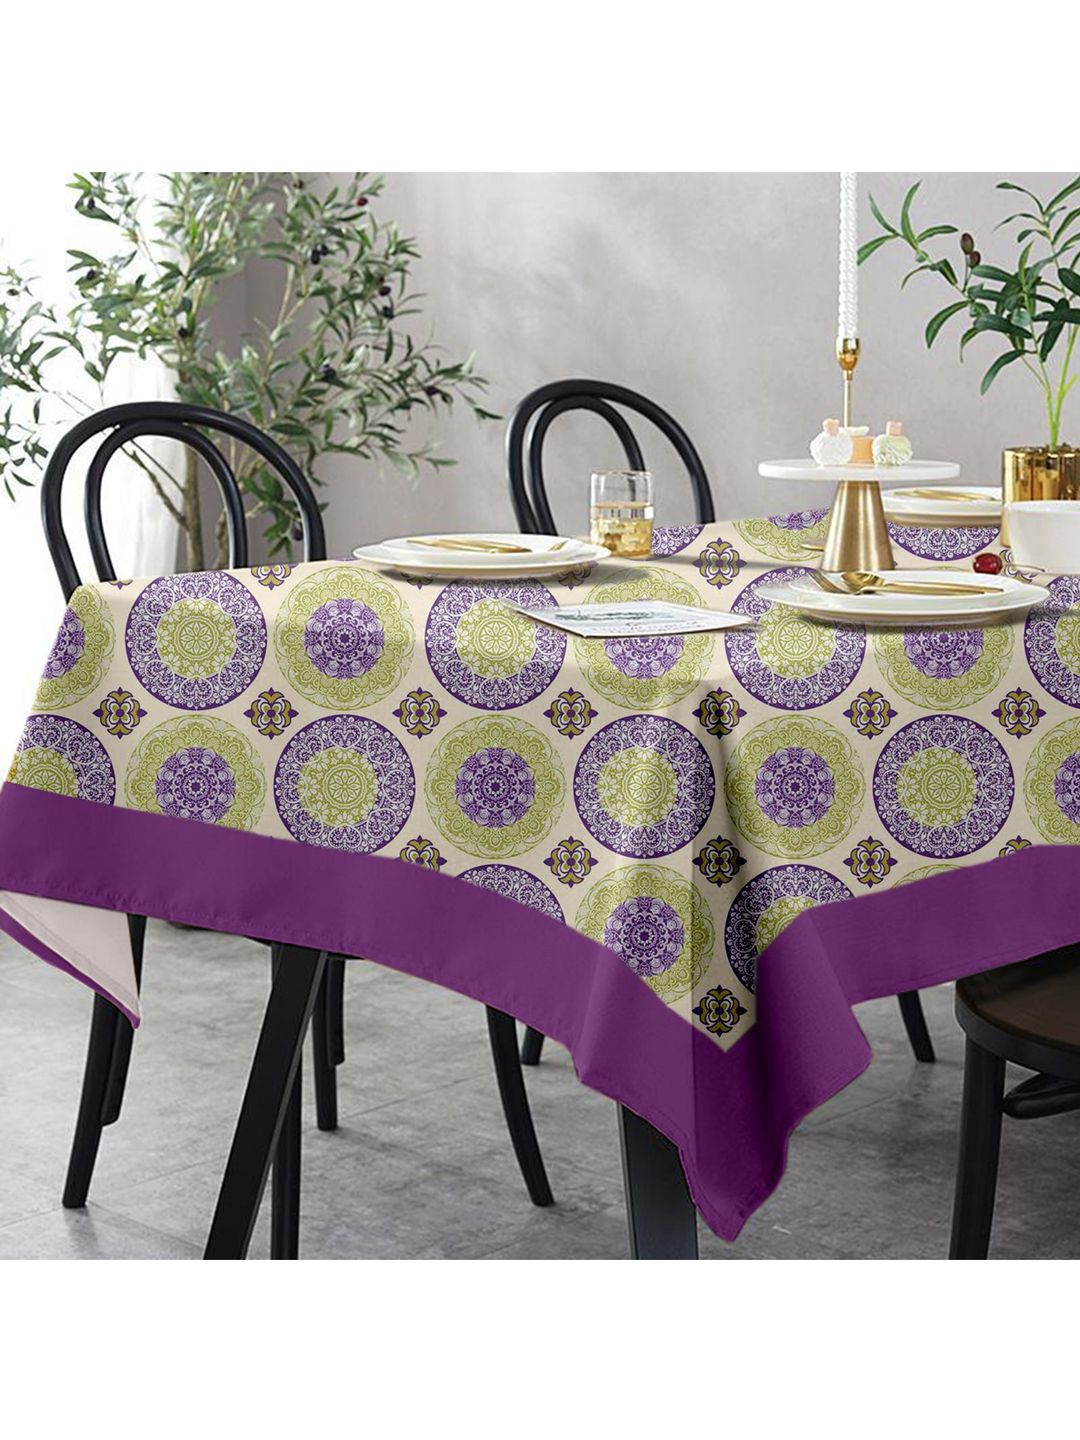 Lushomes 4 Seater Bold Printed Table Cloth Price in India